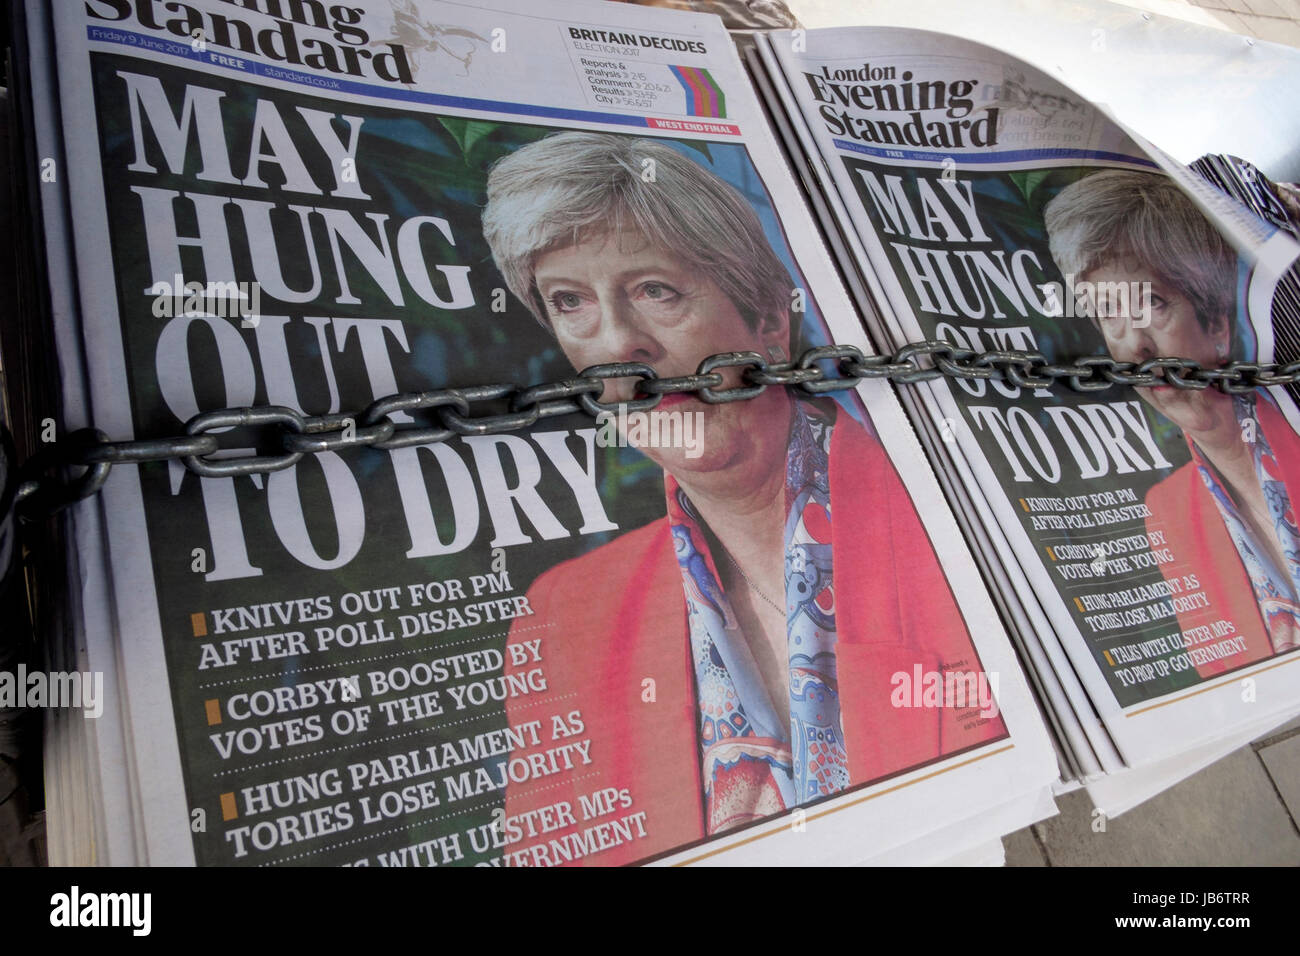 London, UK. 9th June, 2017. The London Evening Standard newspaper front page on the day after the UK General Election 2017. Stock Photo